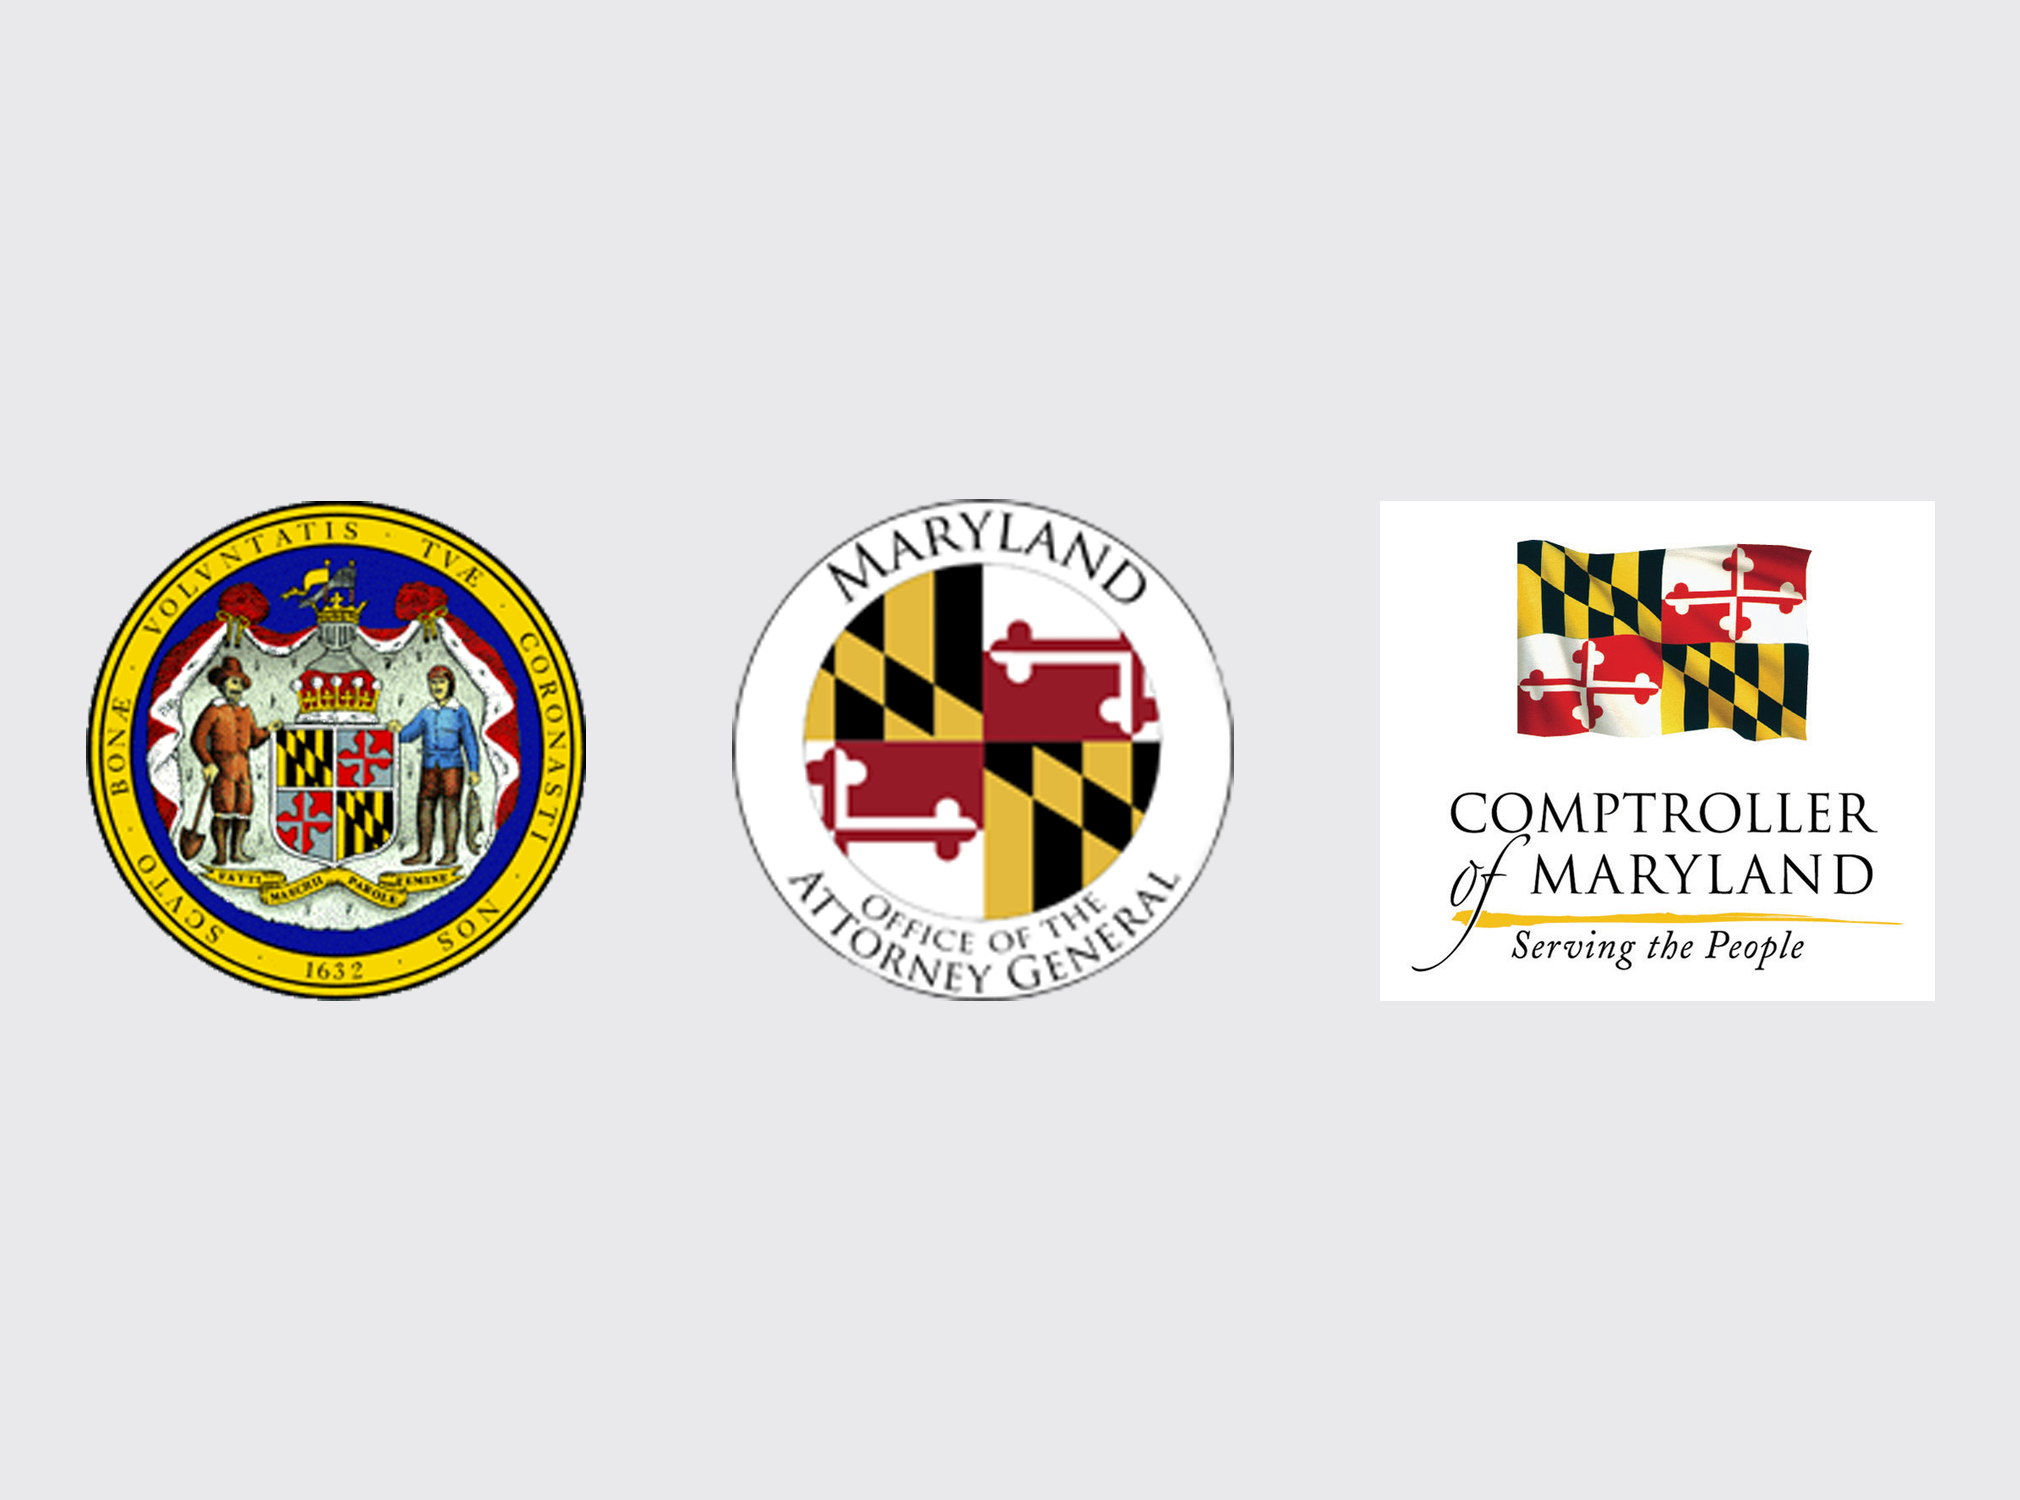 Candidates from both sides of the aisle have announced their campaigns for governor, attorney general and comptroller. (Maryland State Archives, Office of the Attorney General, Comptroller of Maryland Facebook Page, Allison Mollenkamp/Capital News Service)